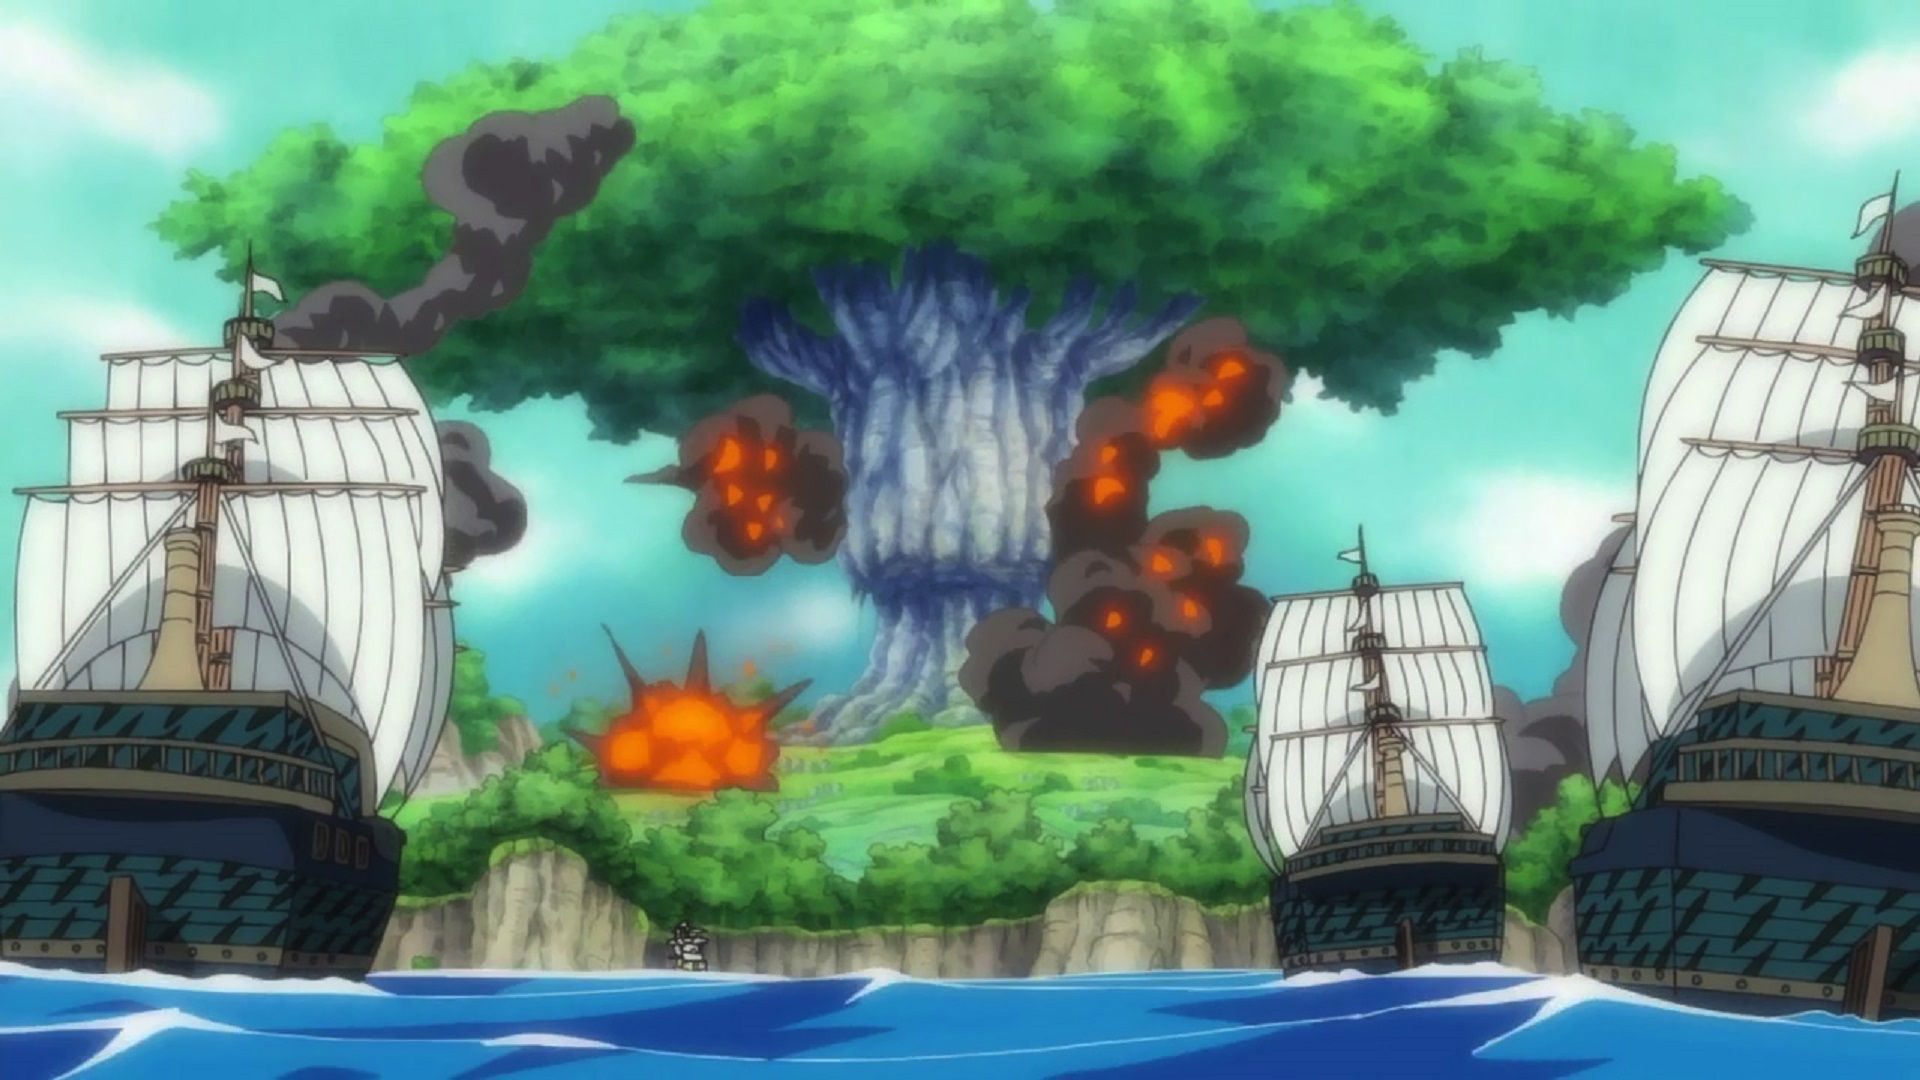 The Buster Call on Ohara (Image via Toei Animation, One Piece)